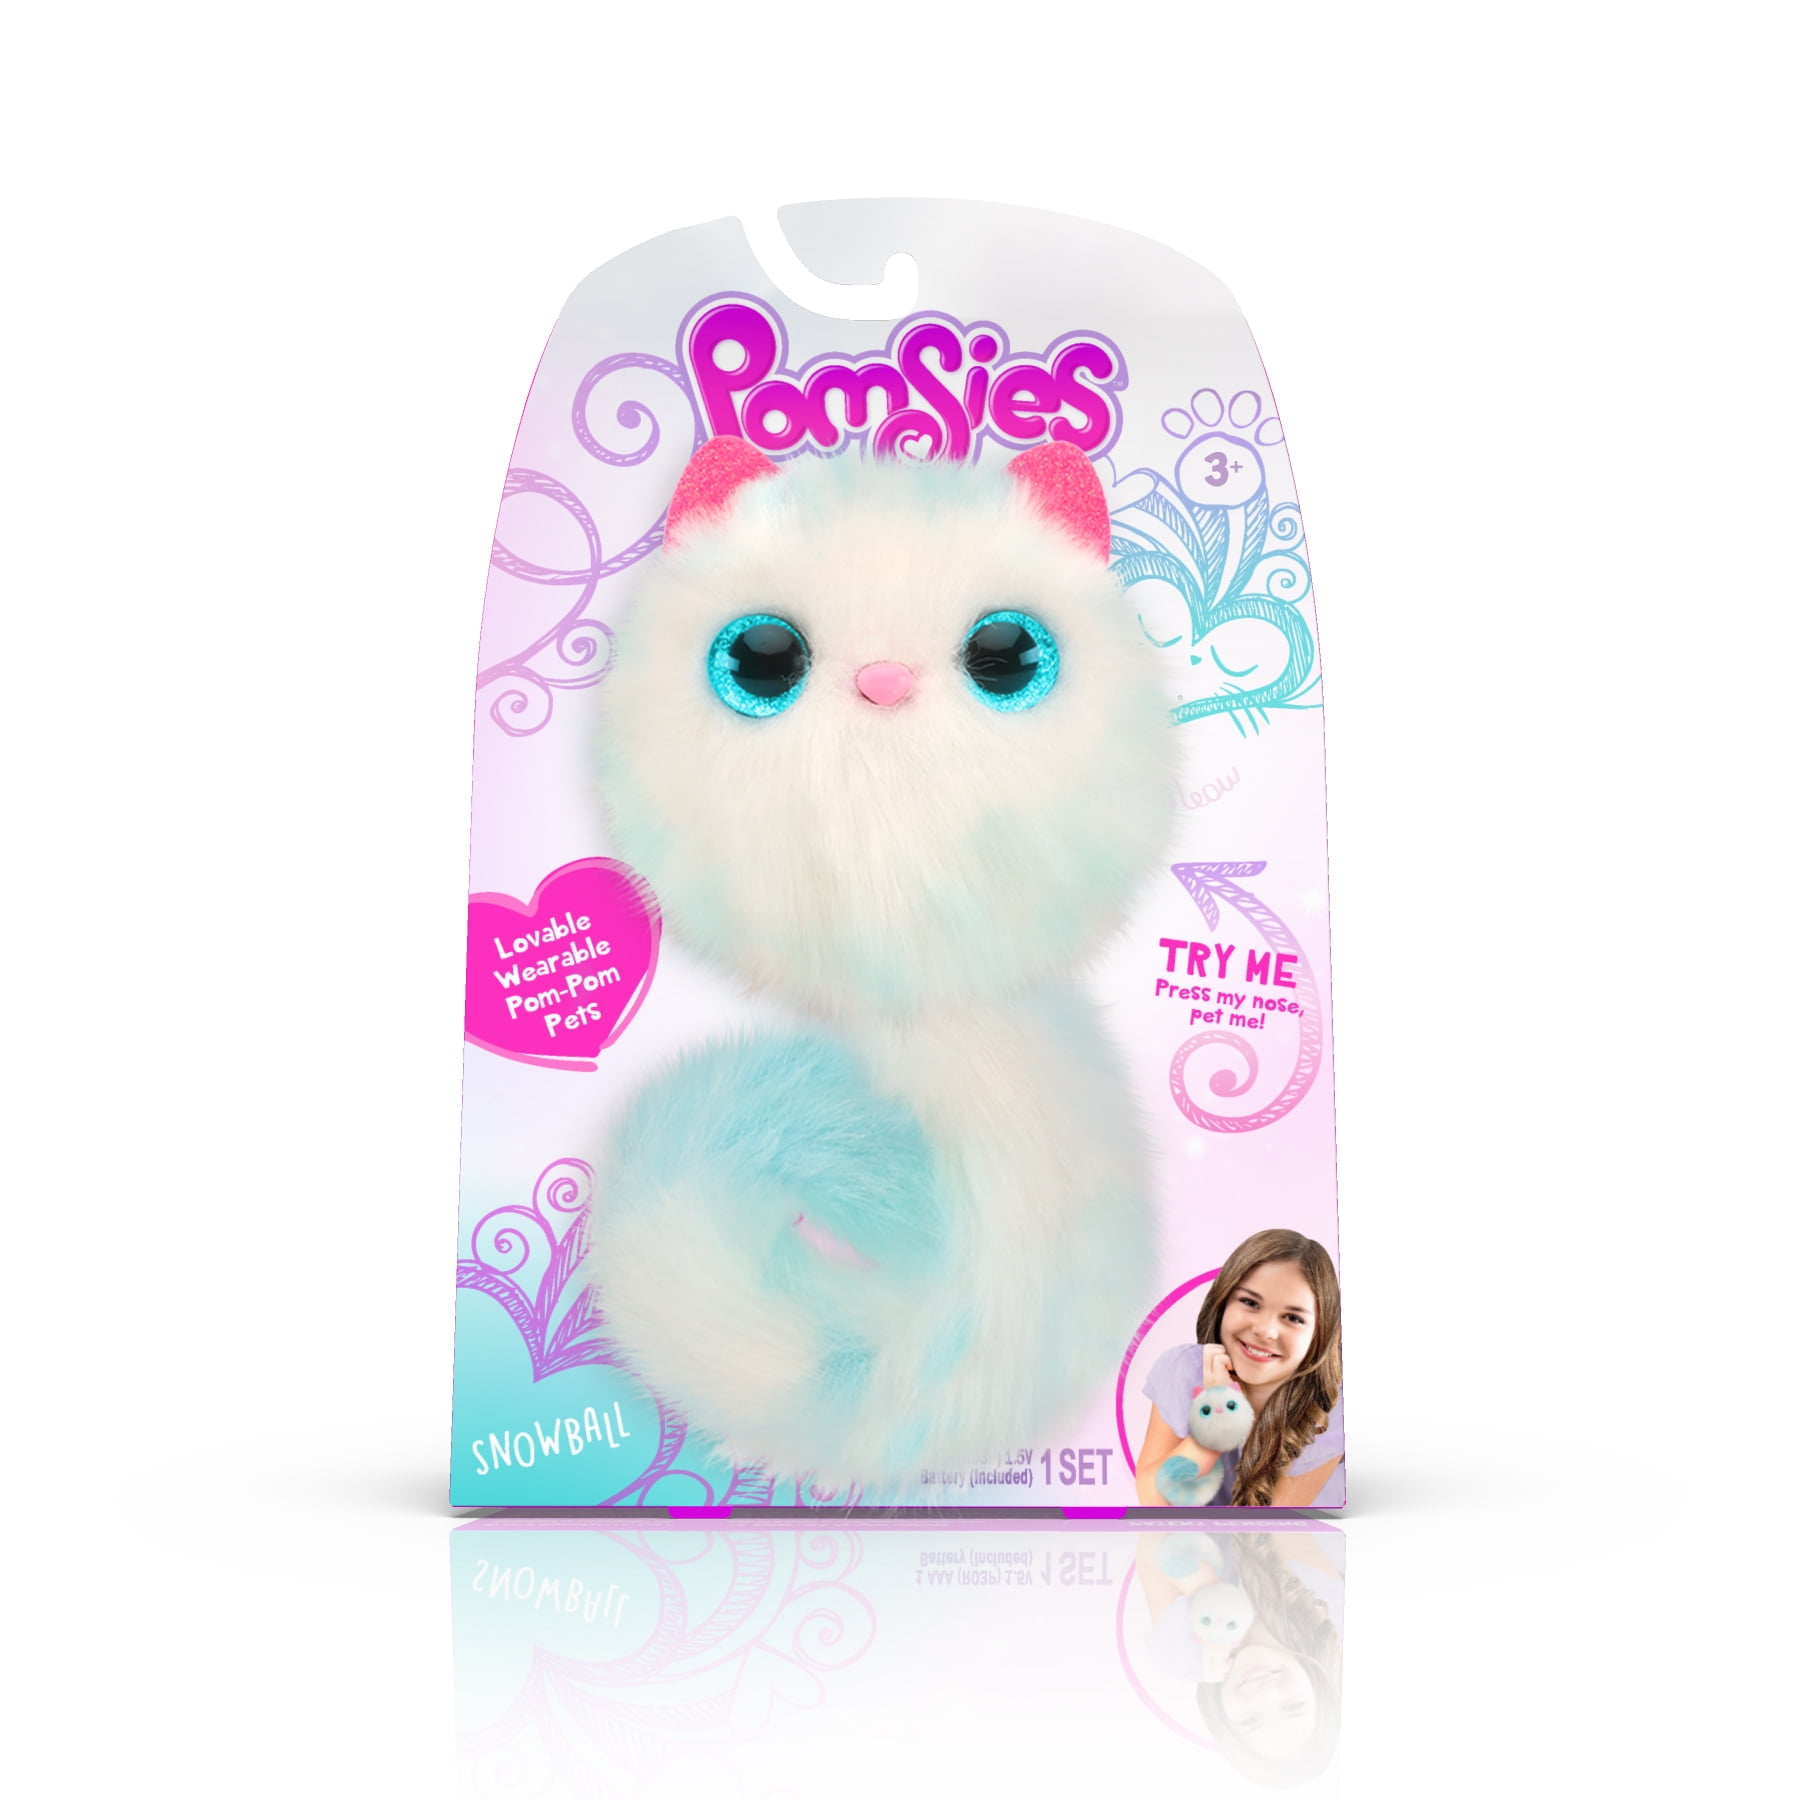 NEW Pomsies Pet Sherbert Interactive Toy 50 Sounds Reactions Wal-Mart Exclusive 